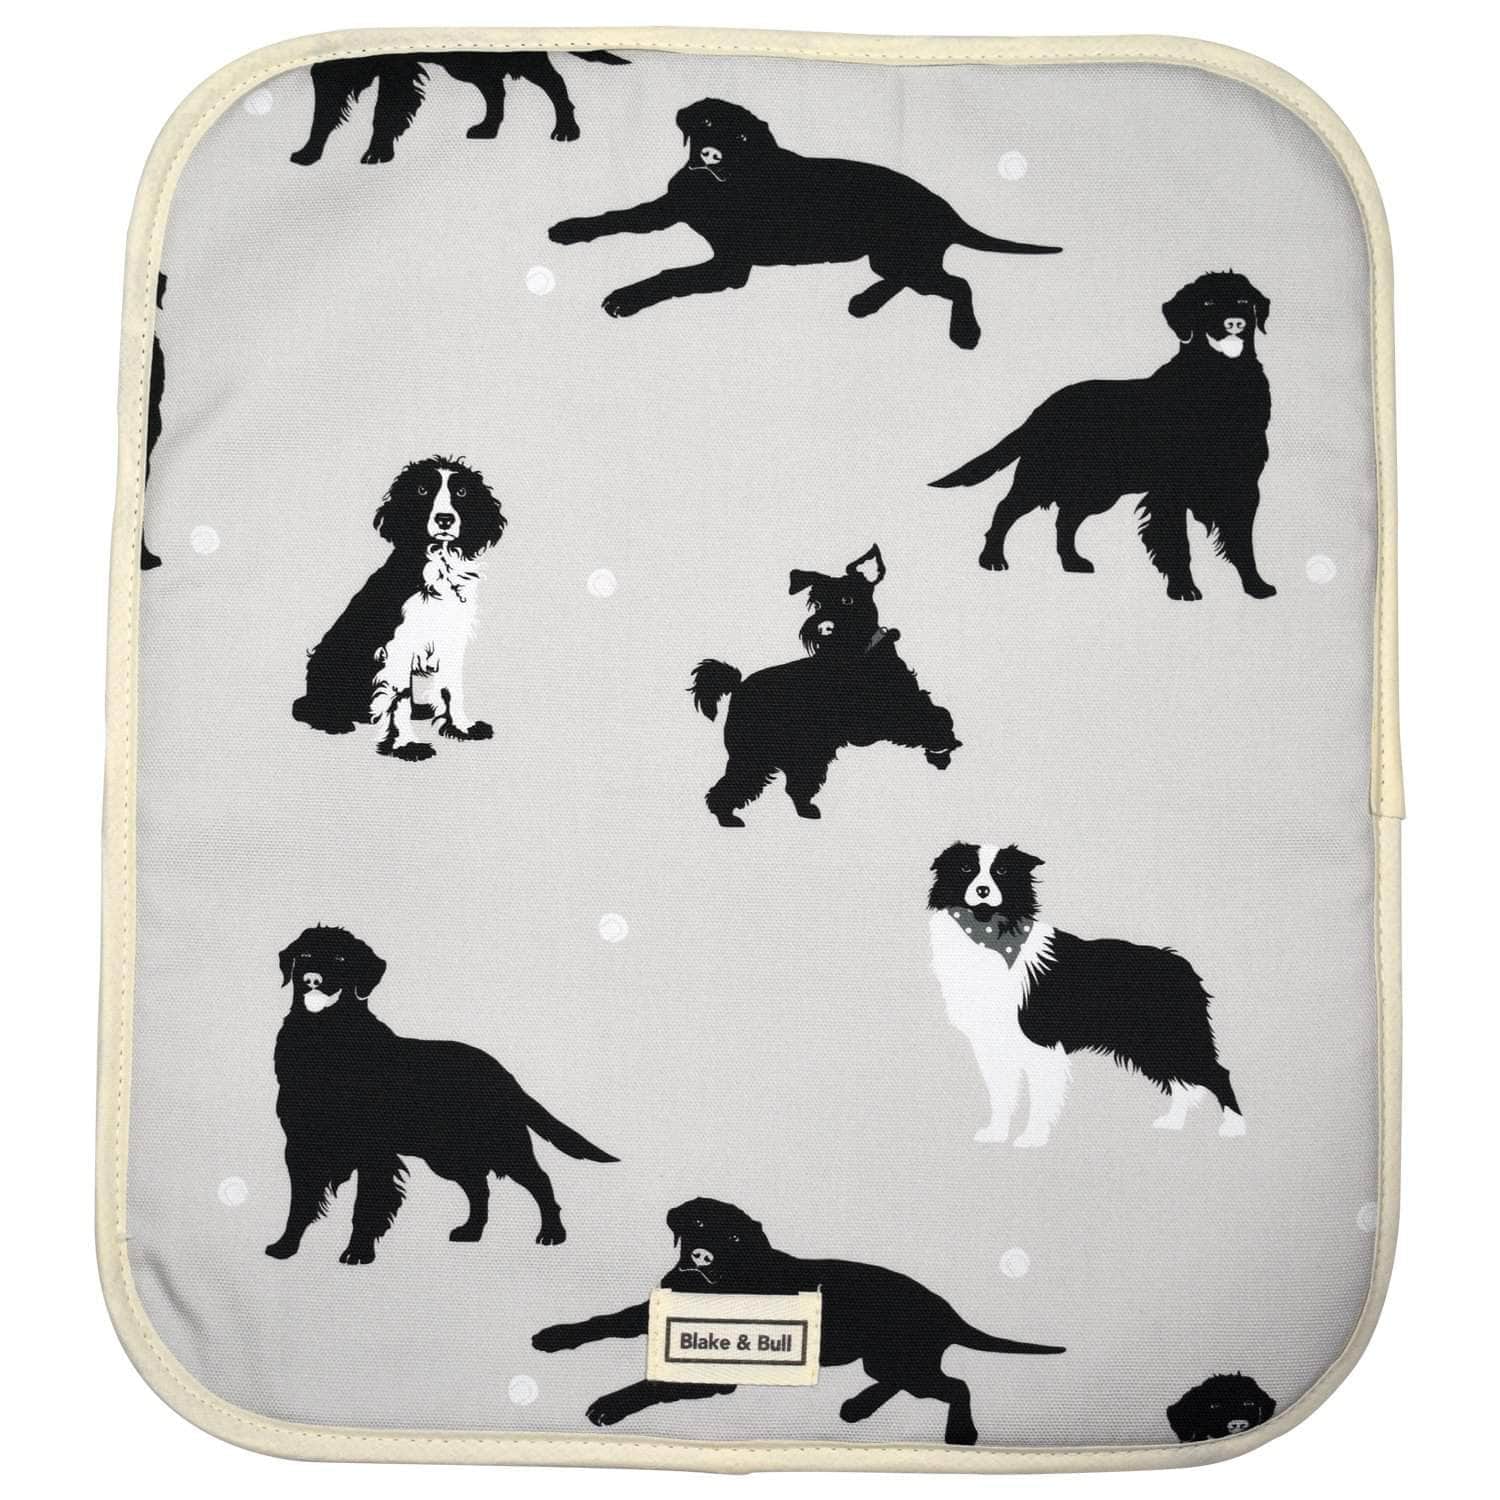 *Not quite perfect* Warming plate cover for use with Aga range cookers - 'Good dog!'